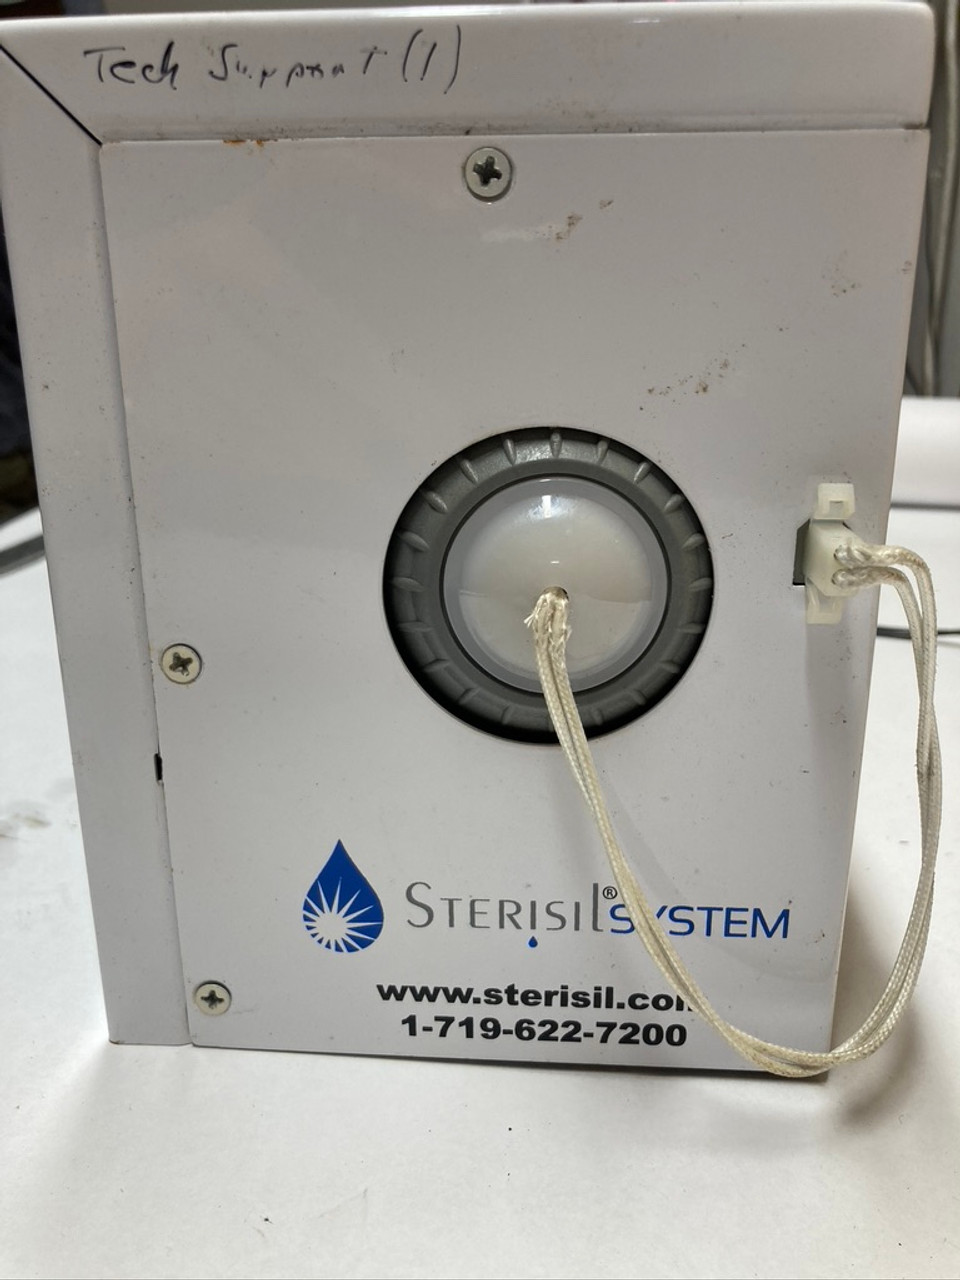 Sterisil G5 Dental Water Purification System